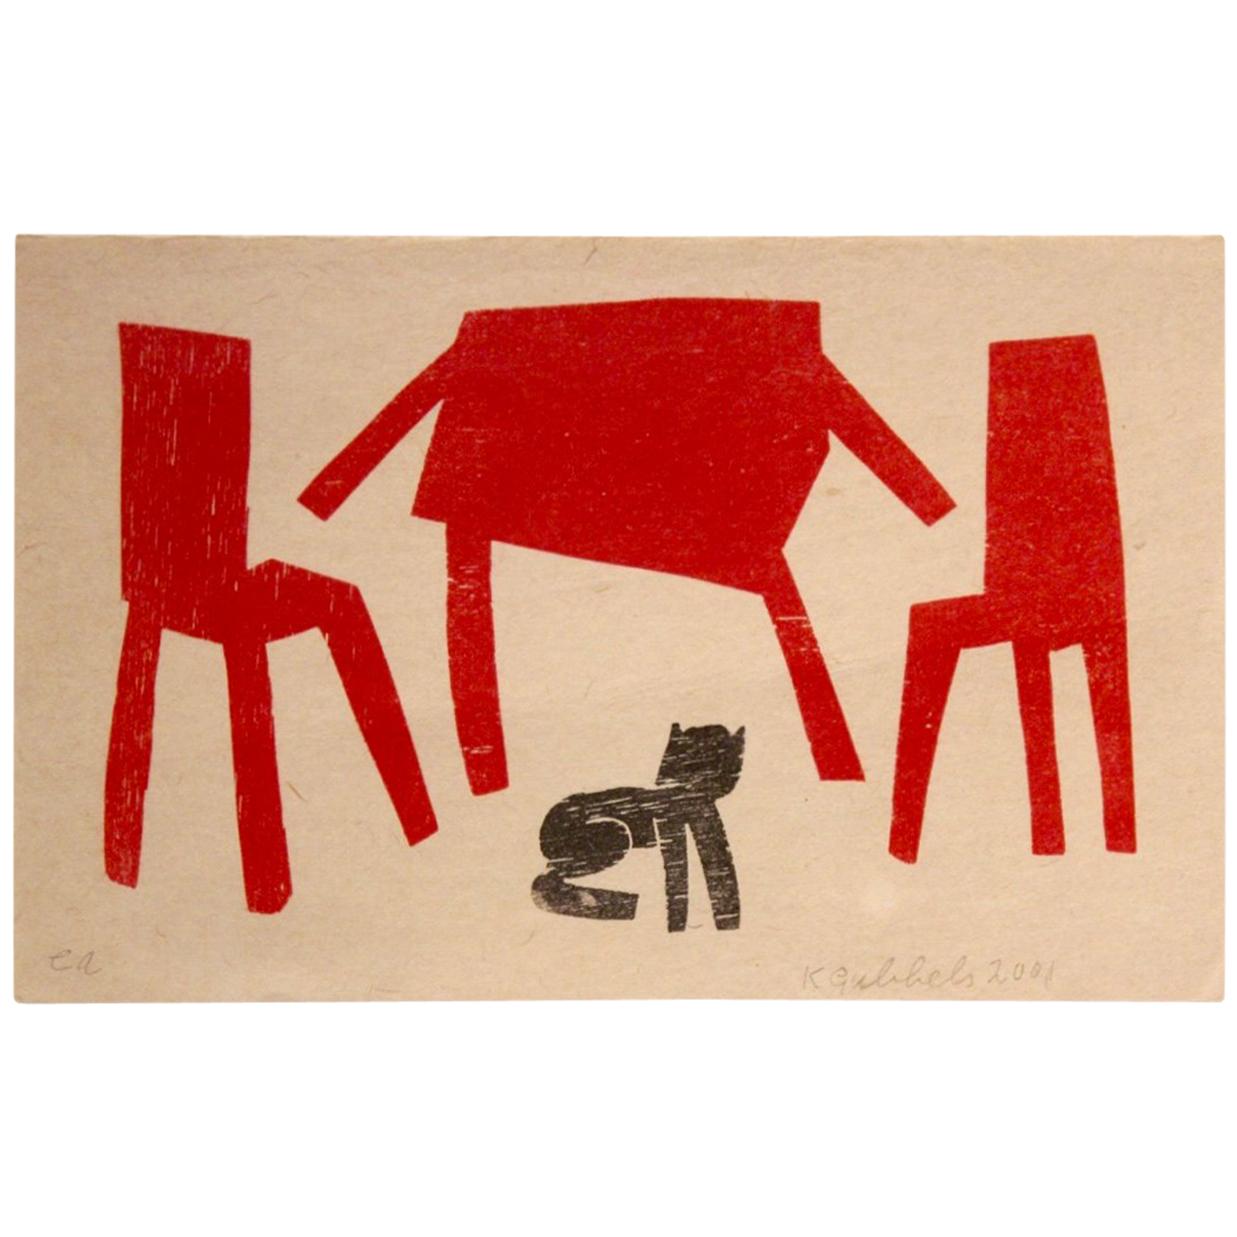 Klaas Gubbels Serigraphy in Black and Red, Hand-Signed and Numbered